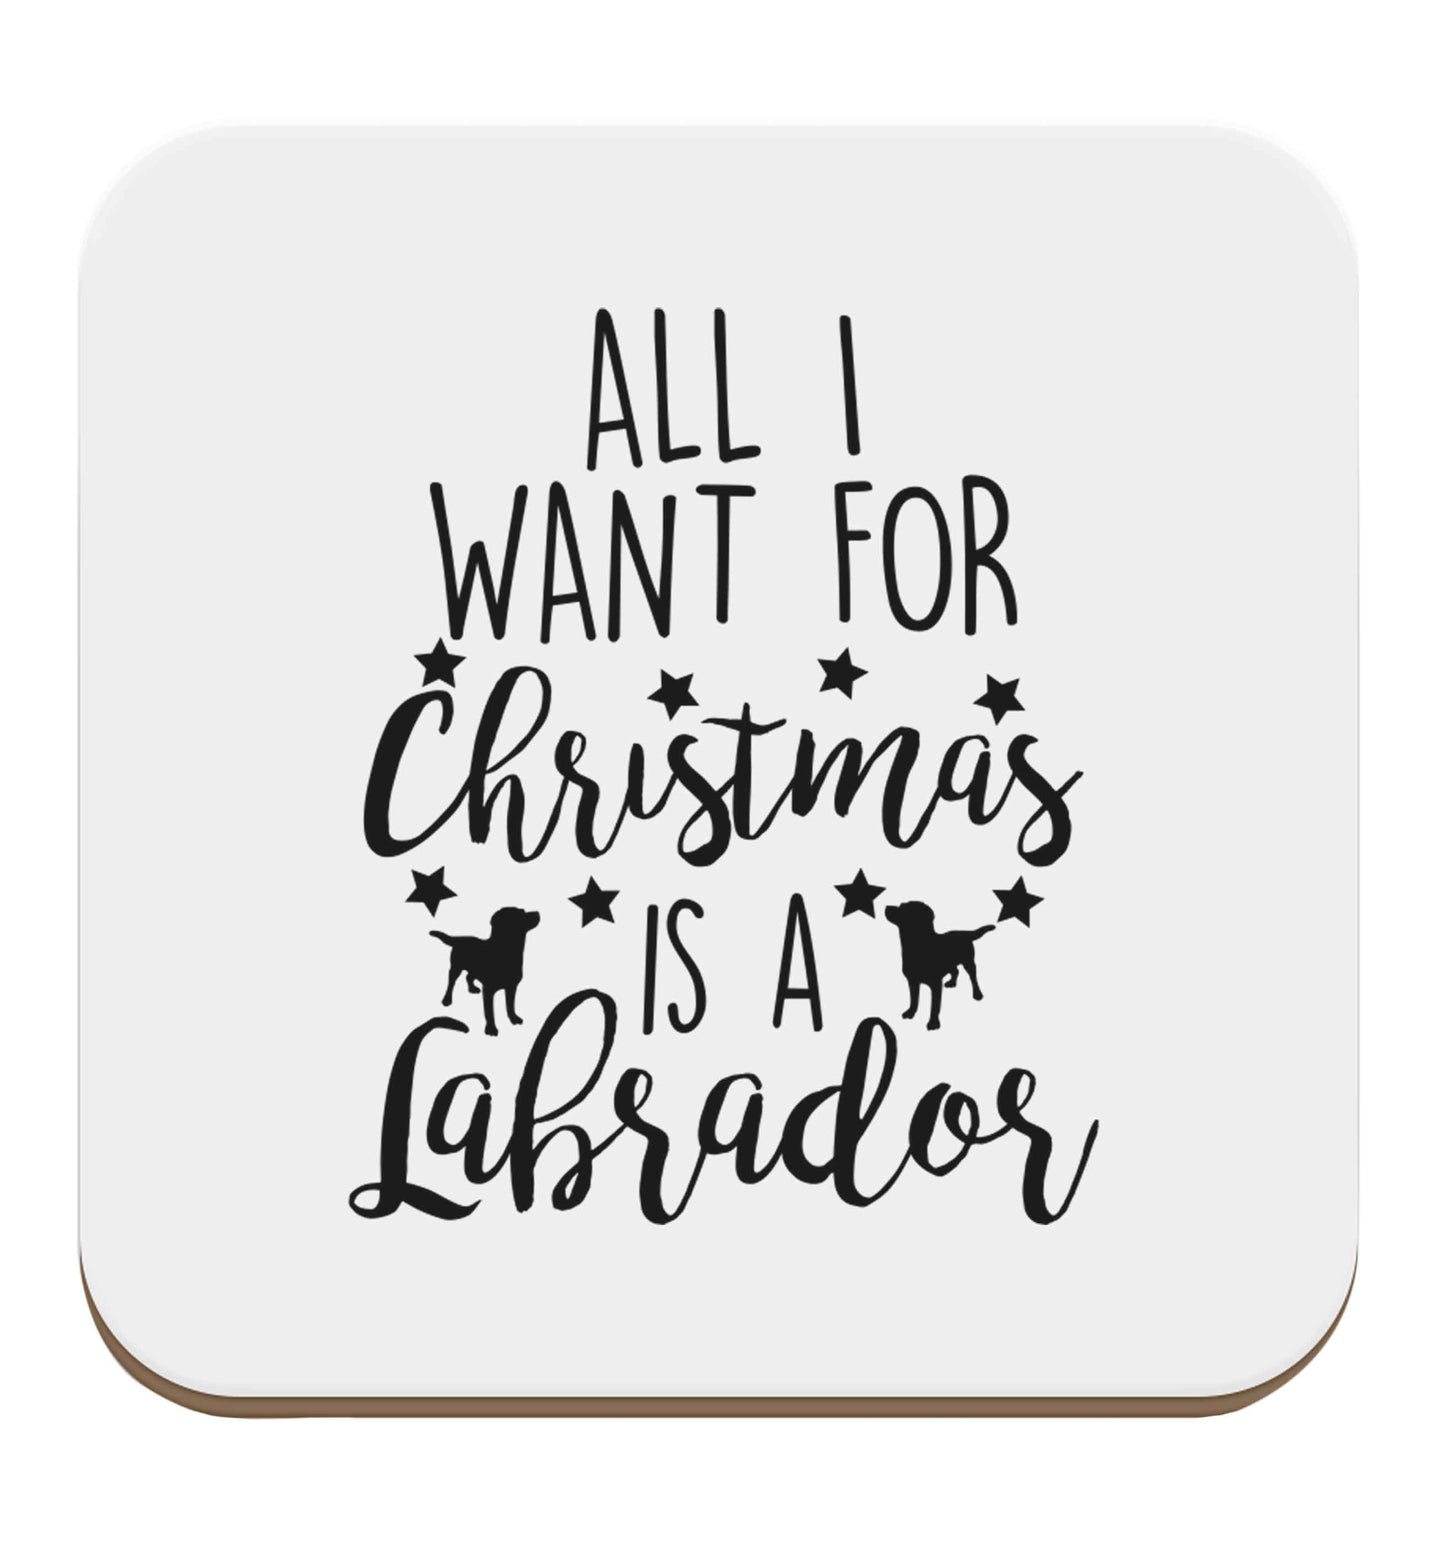 All I want for Christmas is a labrador set of four coasters